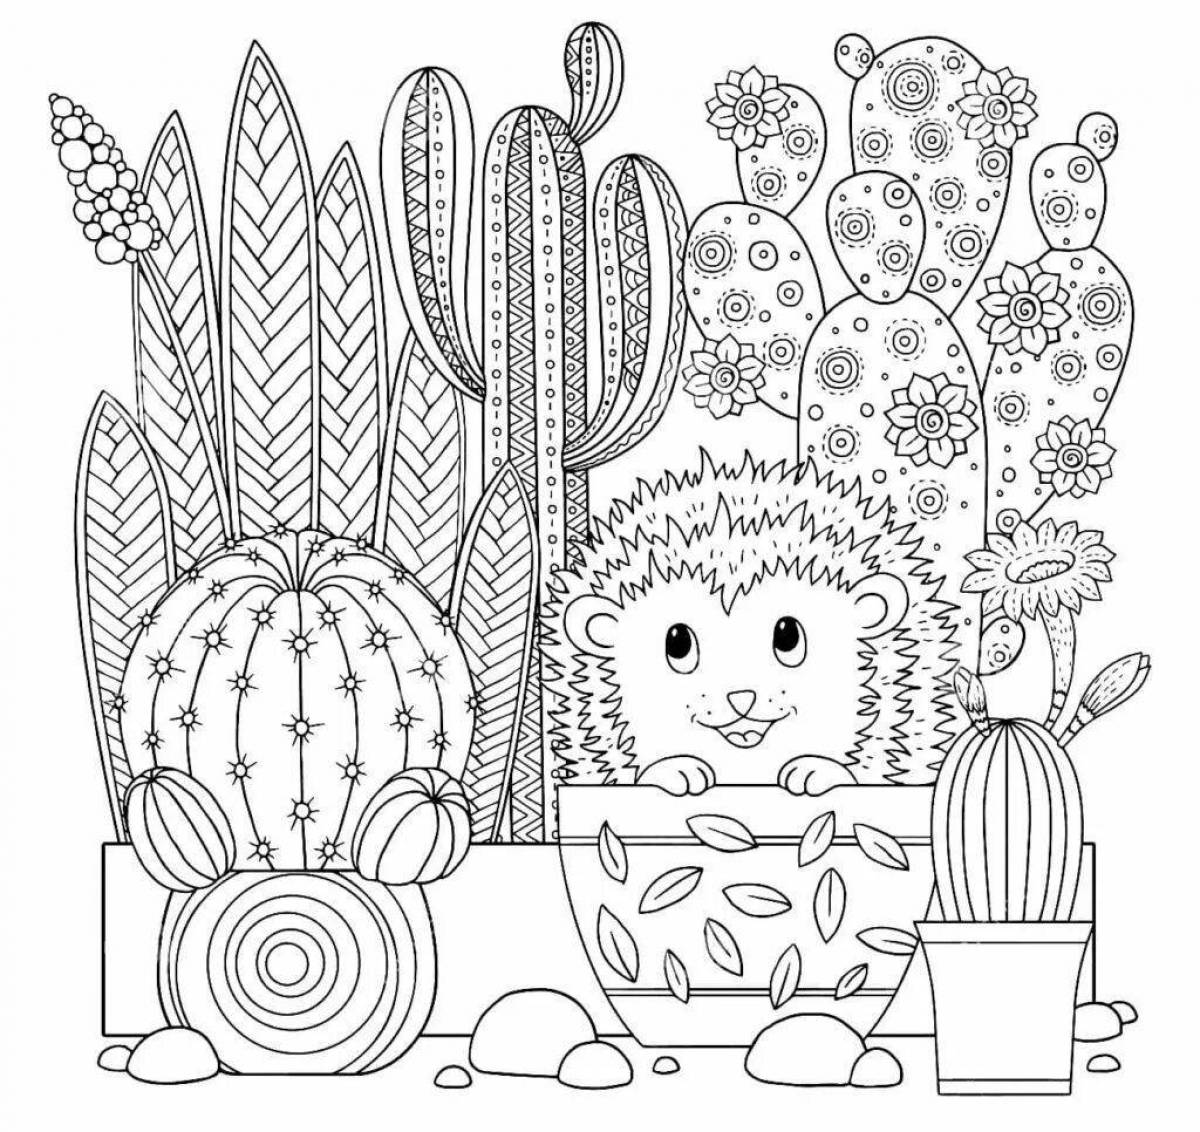 Colorful cactus coloring page